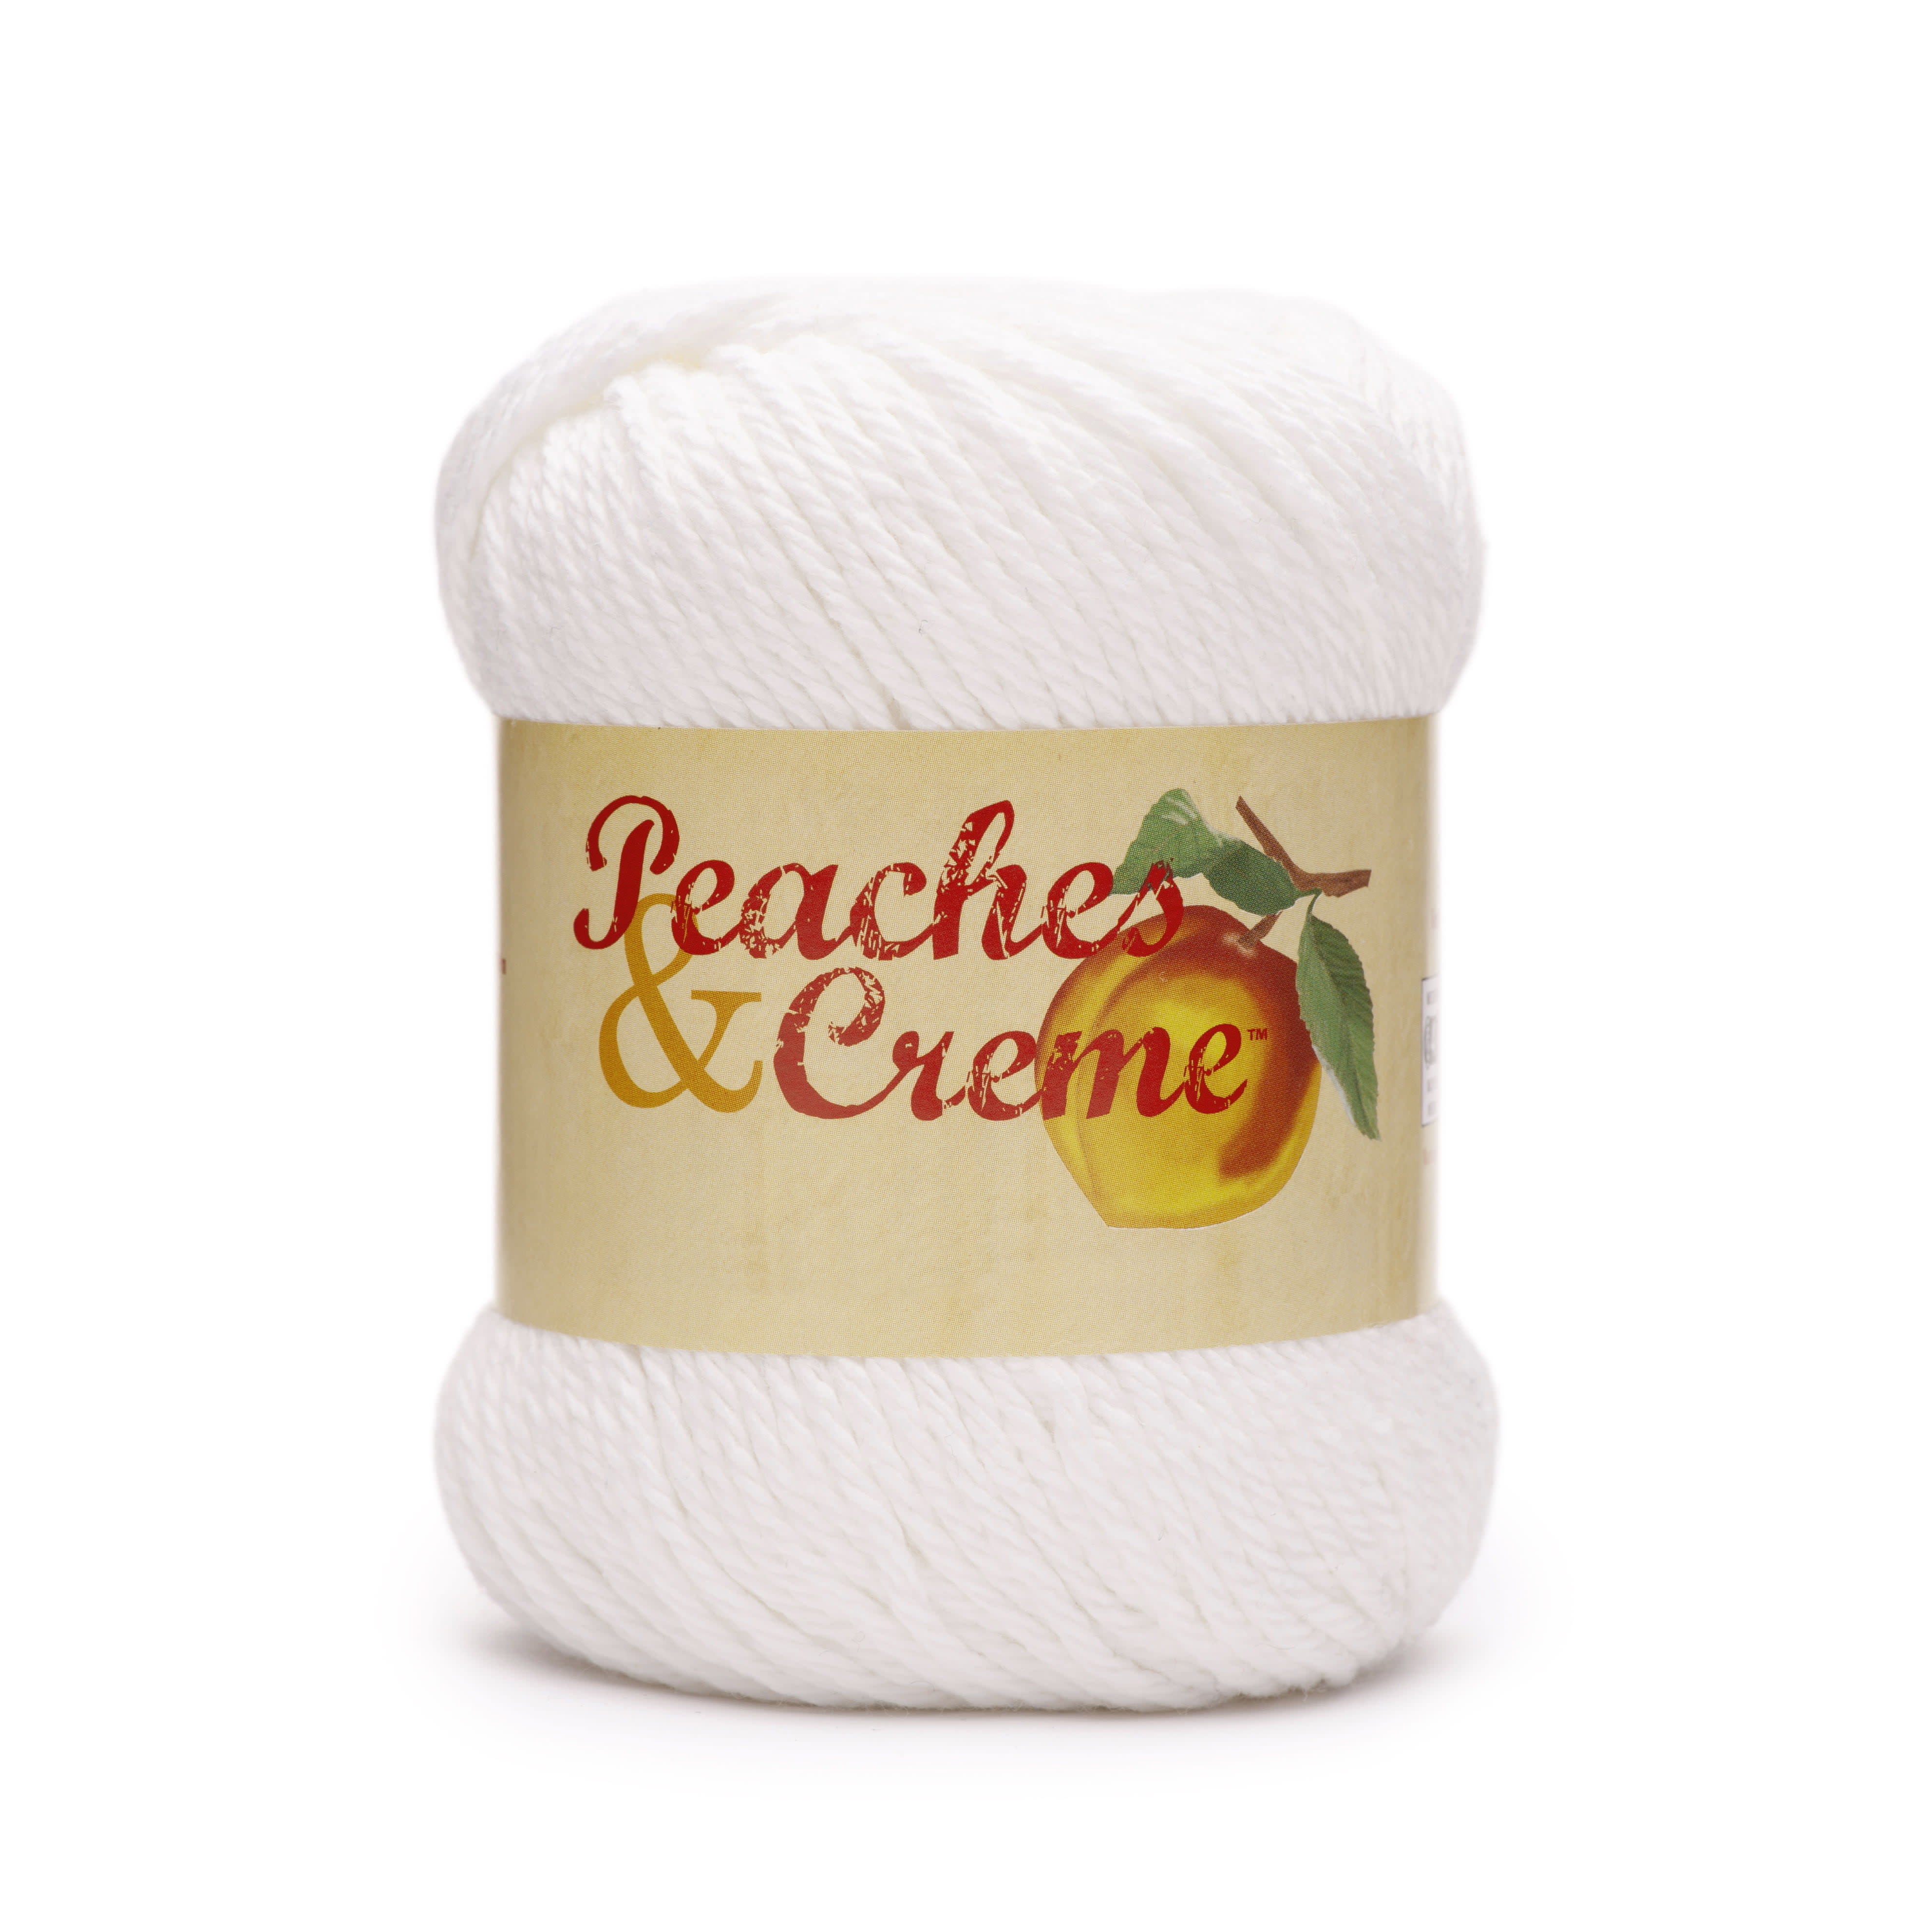 Peaches & Creme Solid 4 Medium Cotton Yarn, White 2.5oz/70.9g, 120 Yards -  DroneUp Delivery